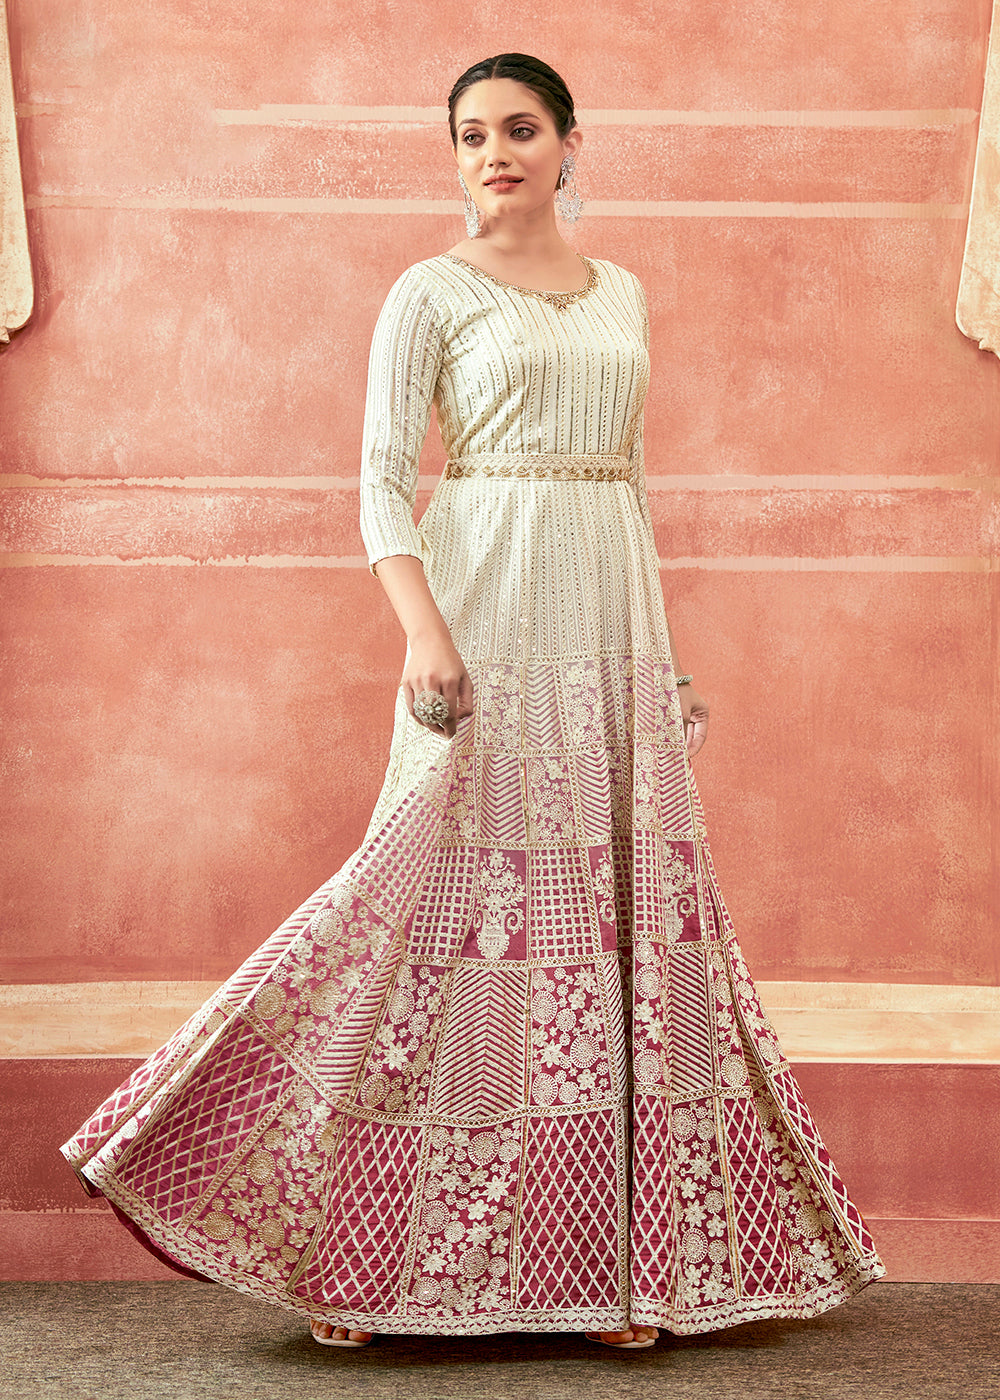 Buy Now Off White & Pink Georgette Embroidered Festive Anarkali Suit Online in USA, UK, Australia, New Zealand, Canada & Worldwide at Empress Clothing. 